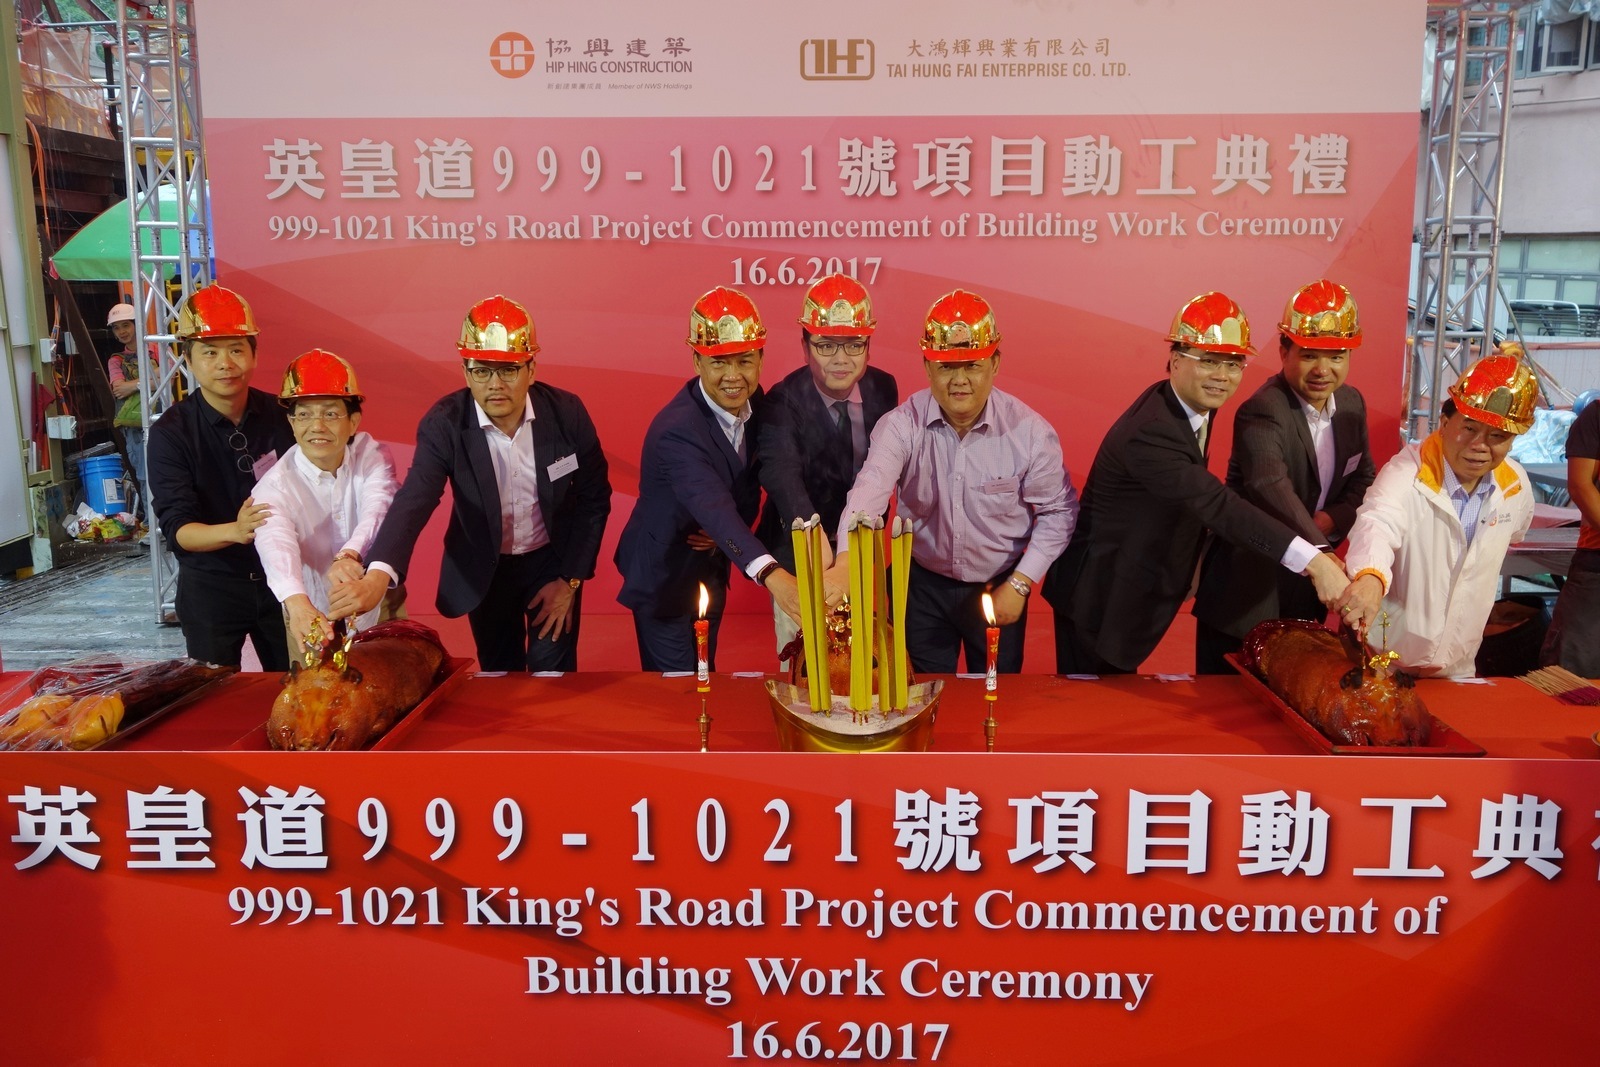 Commencement of building work ceremony